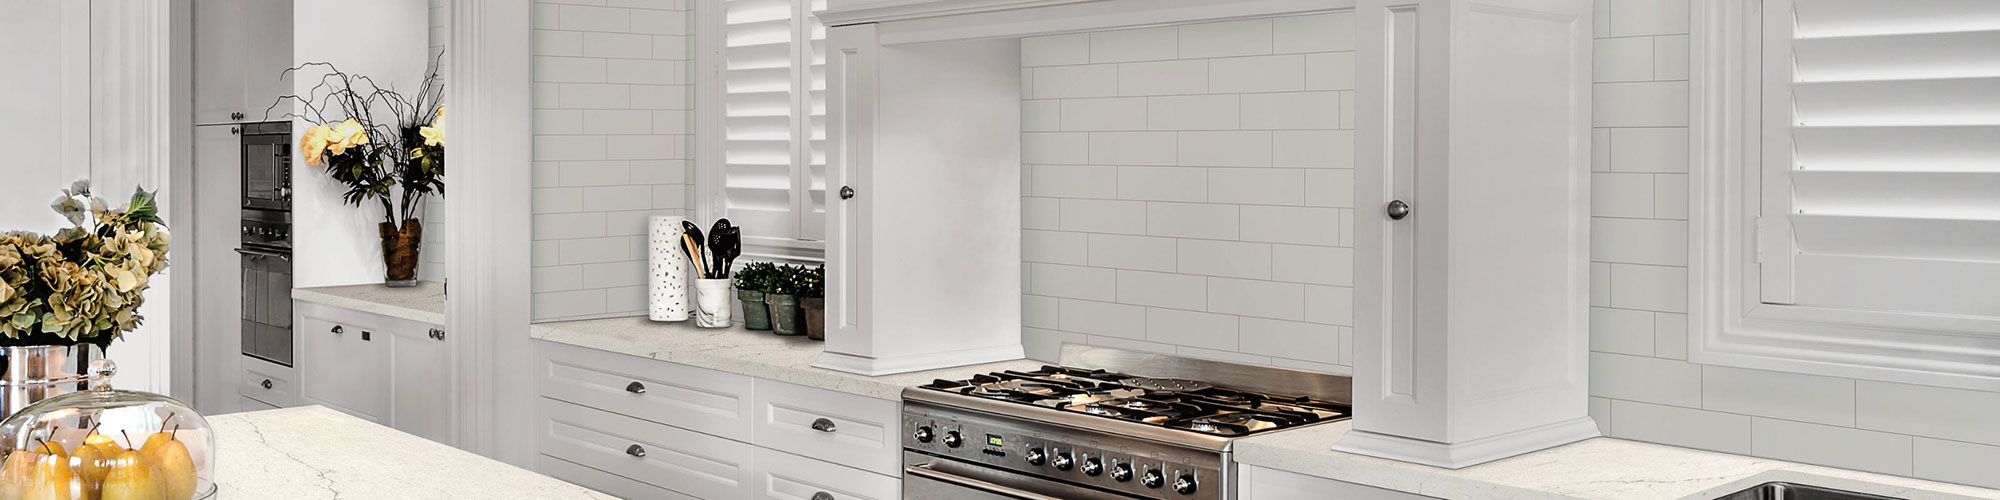 Fresh and clean kitchen décor with white subway tile backsplash, white quartz countertop & island, stainless steel gas stove, and white cabinets.